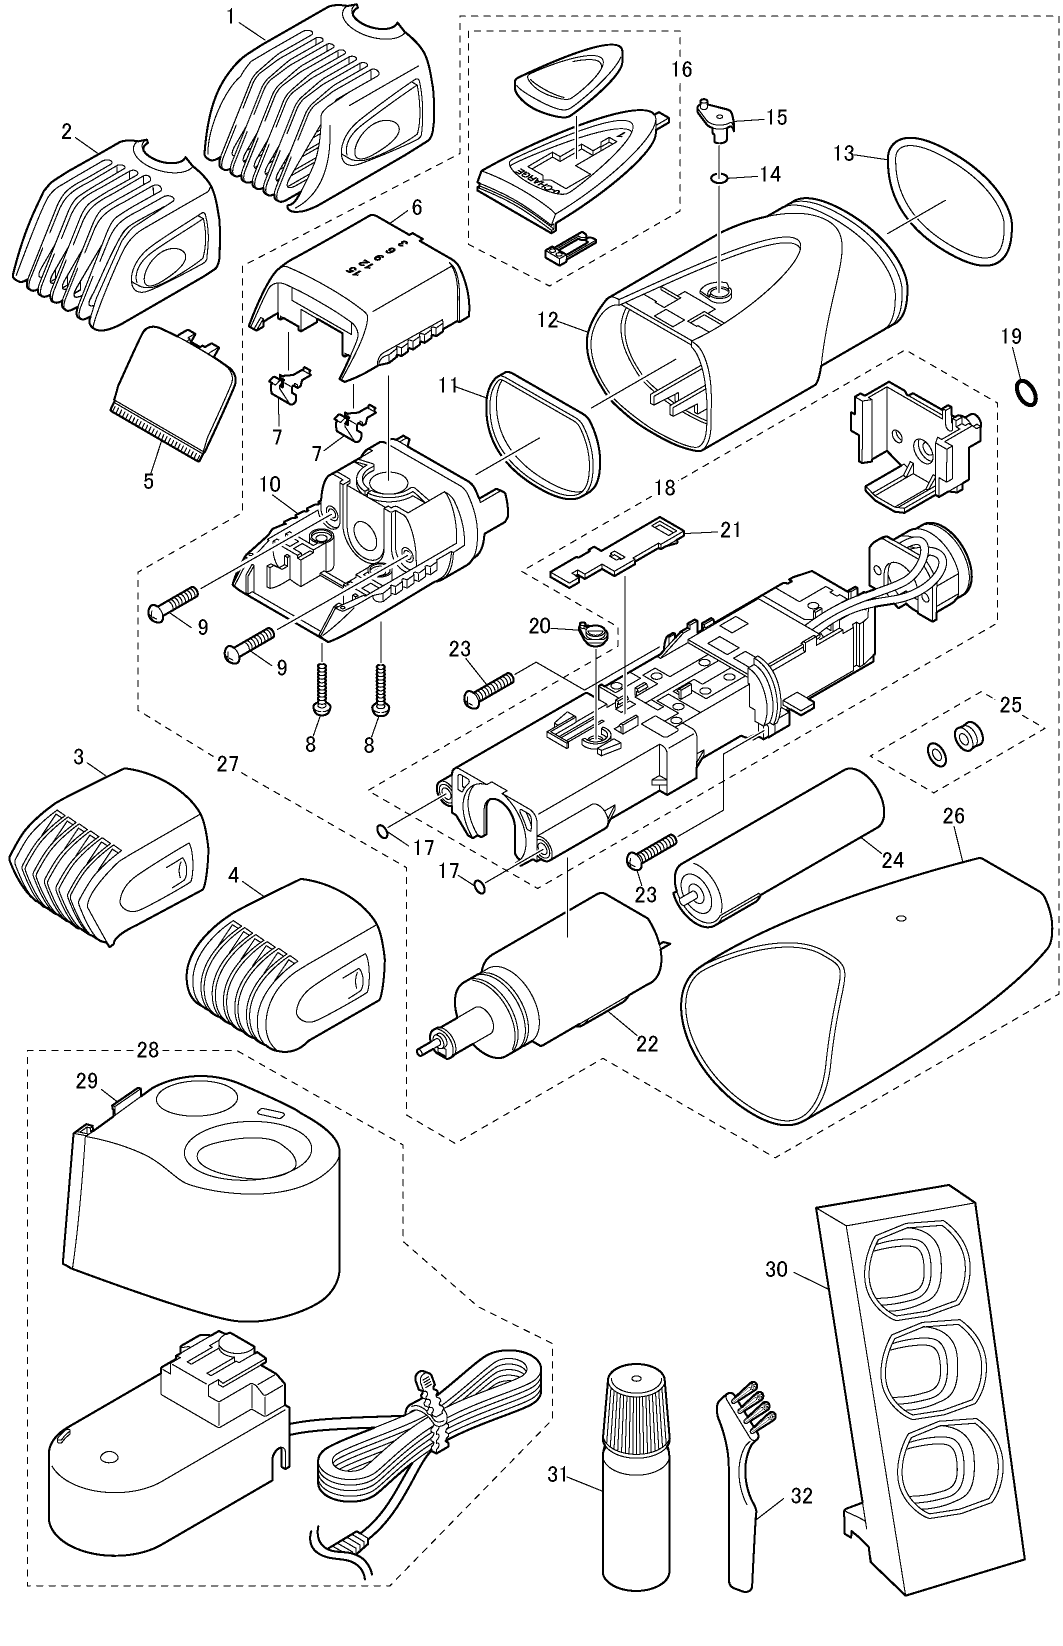 ER-GY10: Exploded View